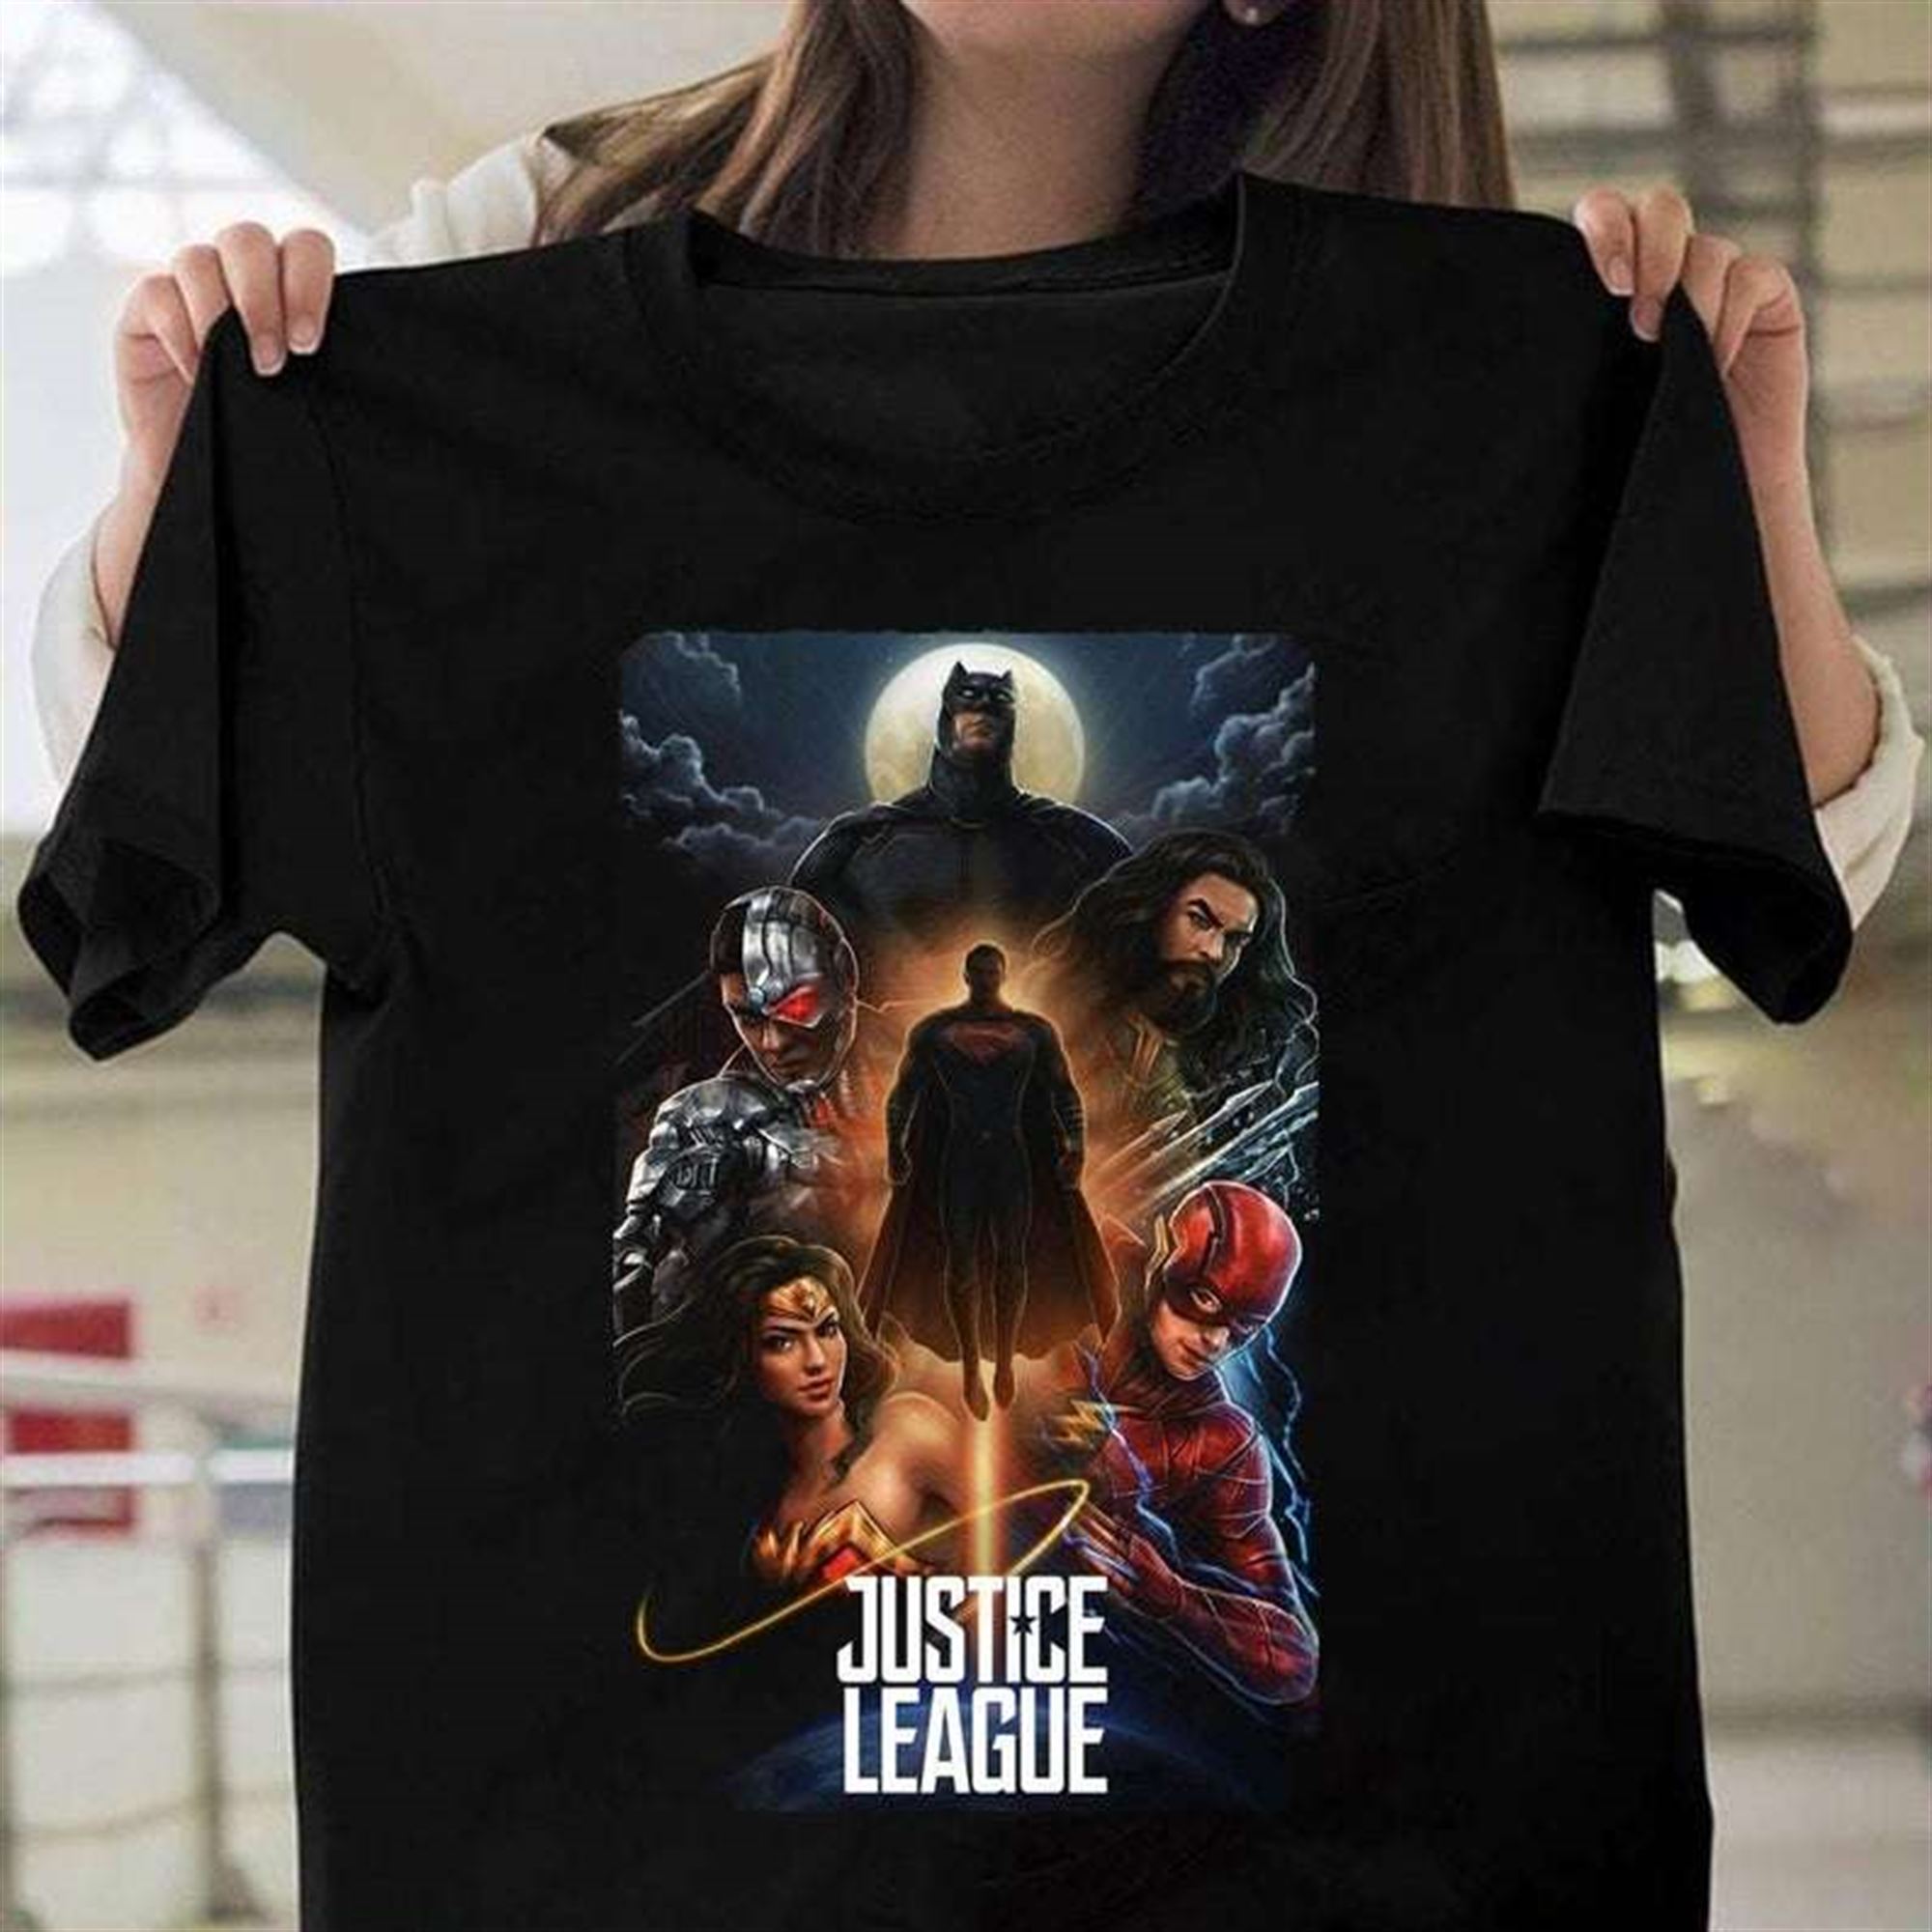 Justice League Dc Comics T Shirt Full Size Up To 5xl